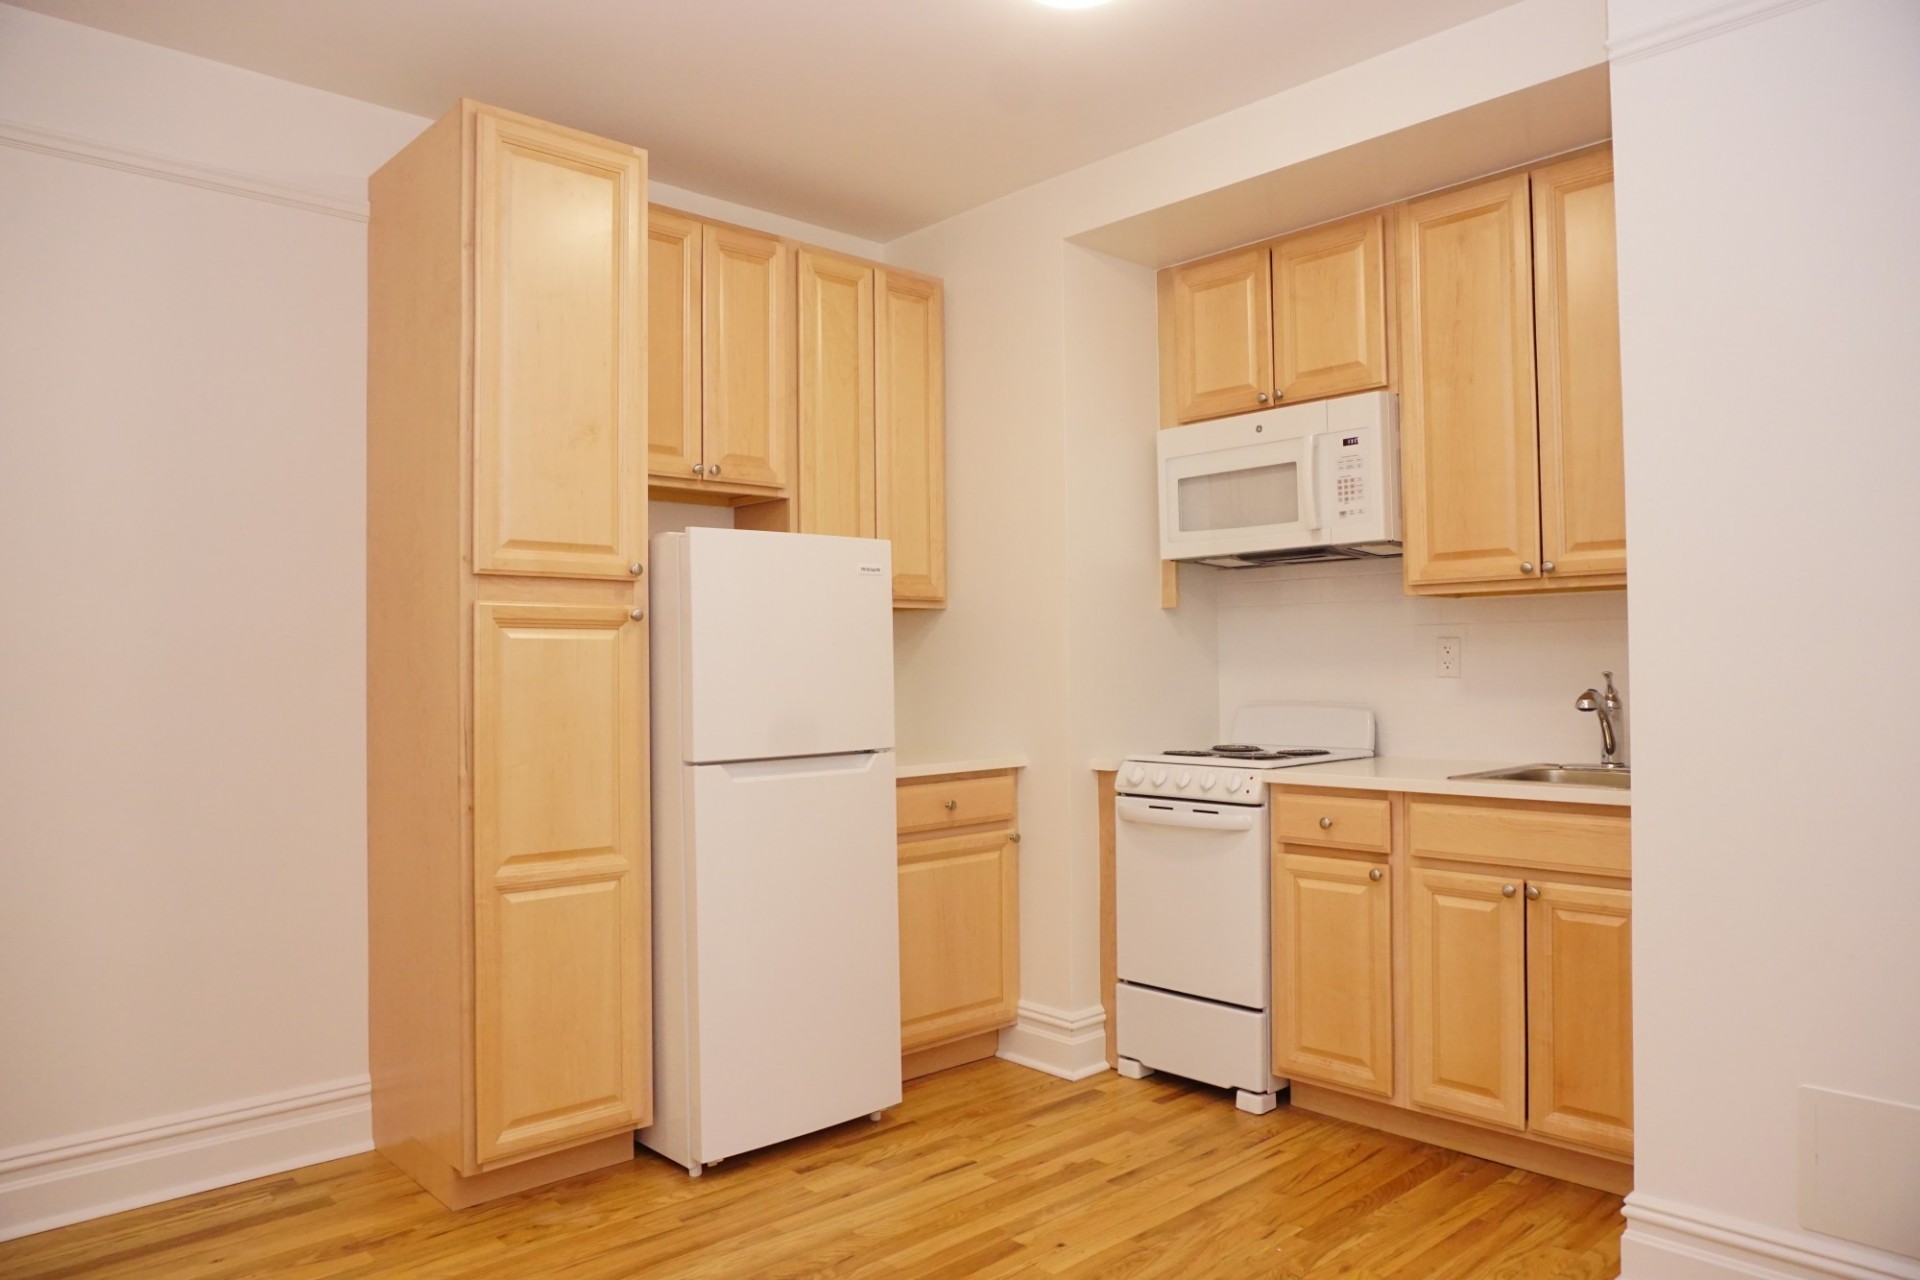 Example of one bedroom apartment - kitchen and living area view